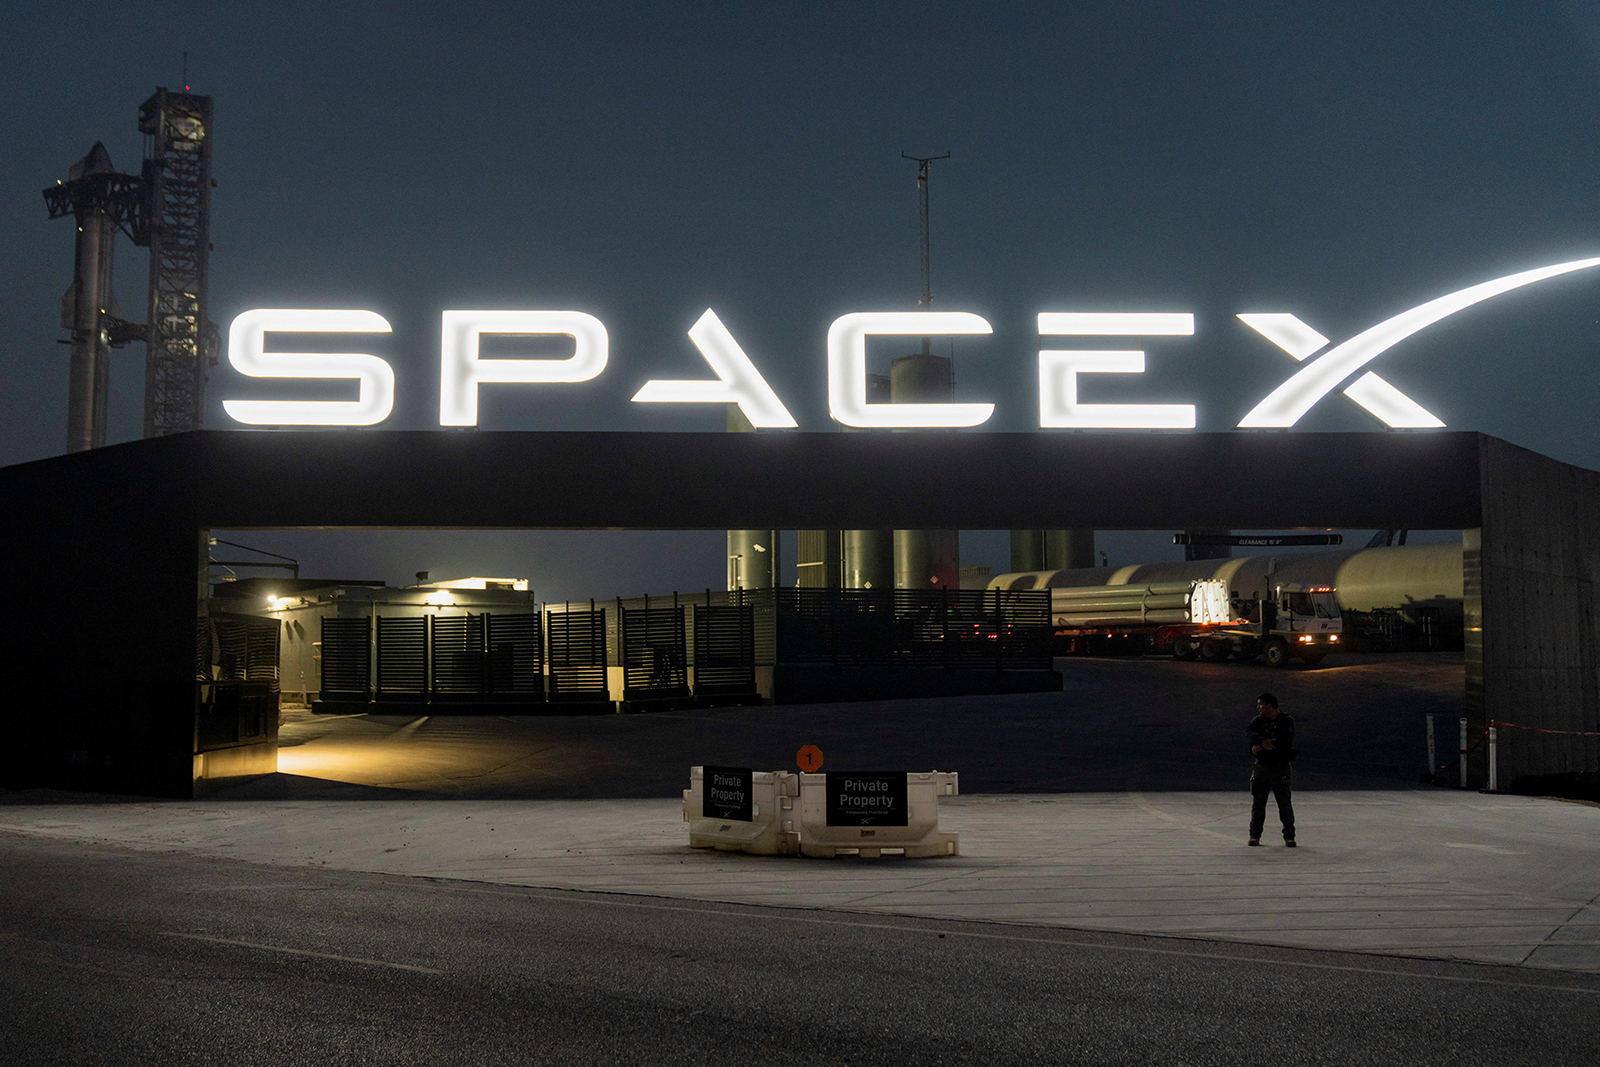 A security guard monitors the entrance as SpaceX's next-generation Starship spacecraft atop its powerful Super Heavy rocket is prepared for a third launch from the company's Boca Chica launchpad on an uncrewed test flight, near Brownsville, Texas, U.S. on March 13.